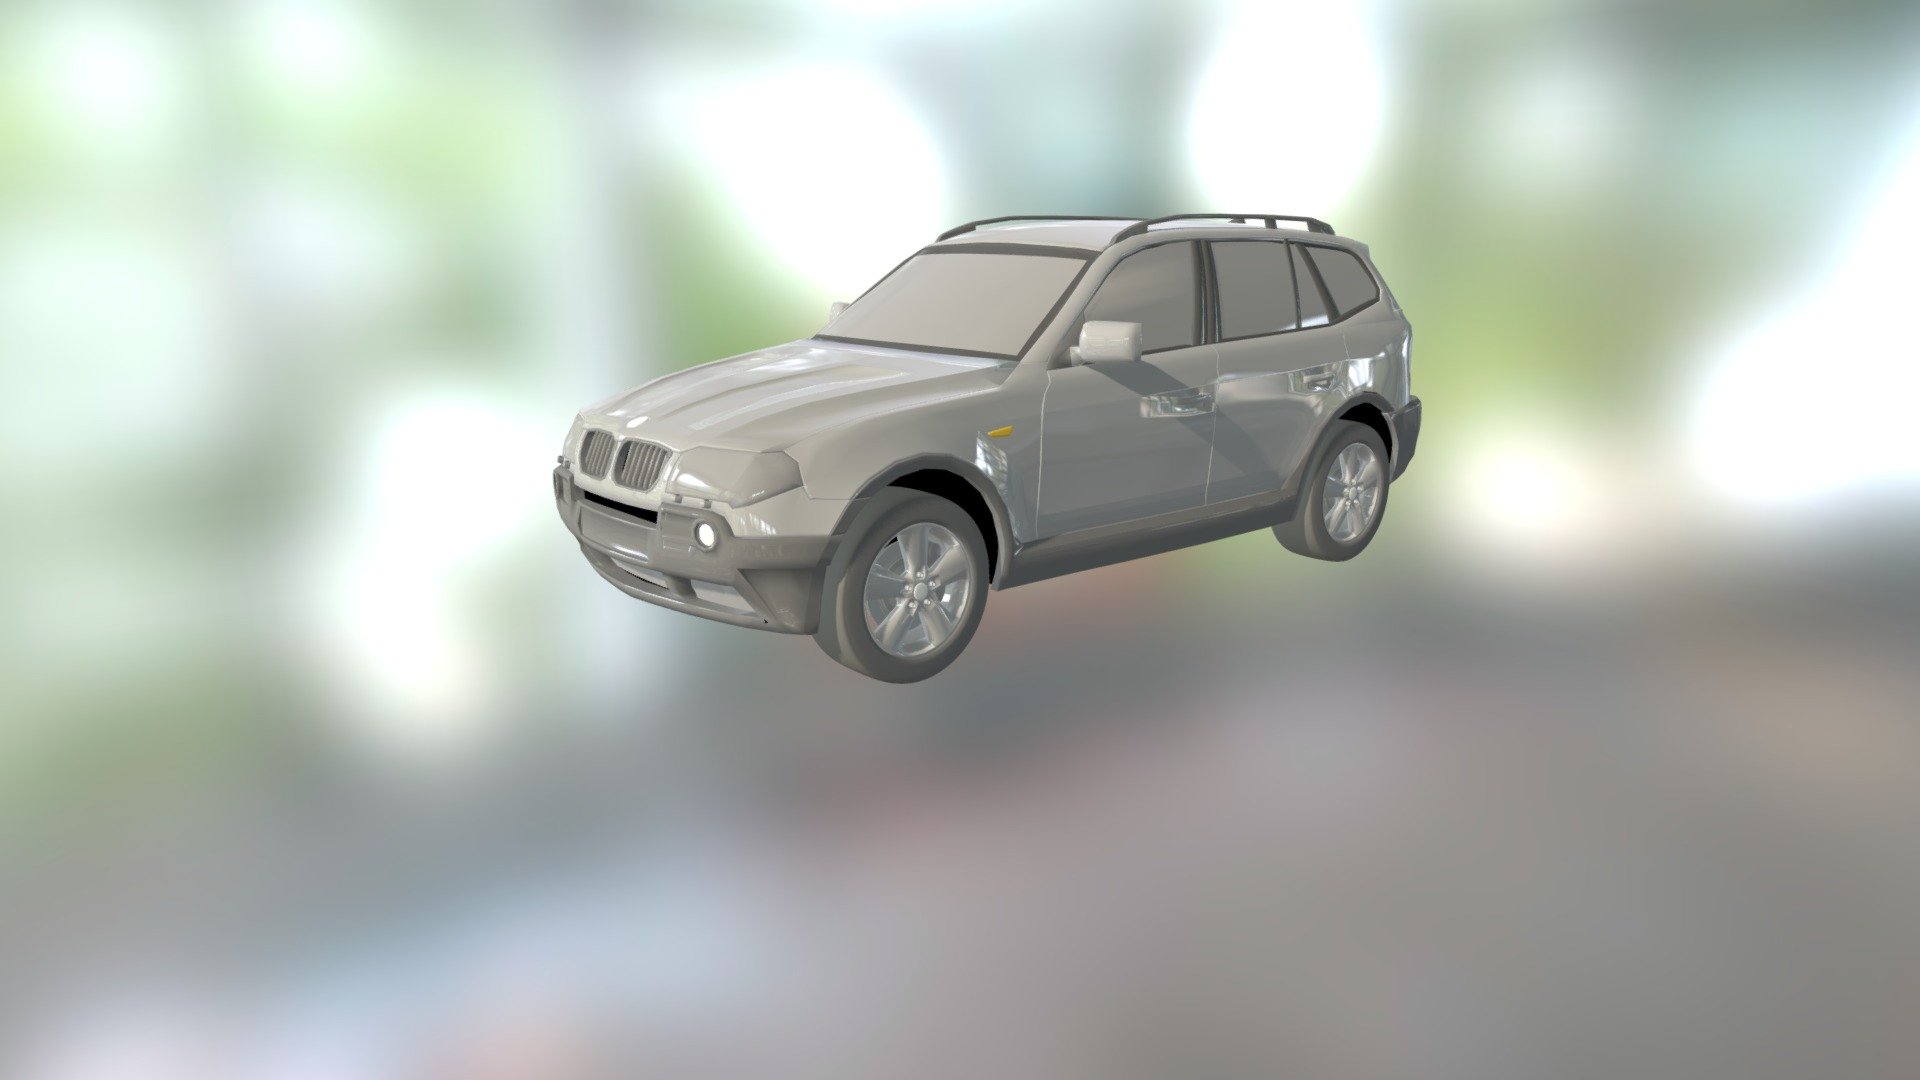 This 3D model was created with program 3D Max.
The BMW X3 is a compact luxury crossover SUV manufactured by German automaker BMW since 2003. Based on the BMW 3 Series platform, and now in its second generation, BMW markets the crossover as a Sports Activity Vehicle, the company's proprietary descriptor for its X-line of vehicles. The first generation X3 was designed by BMW in conjunction with Magna Steyr of Graz, Austria—who also manufactured all X3s under contract to BMW. BMW manufactures the second generation X3 at their Spartanburg plant in South Carolina, United States 3d model